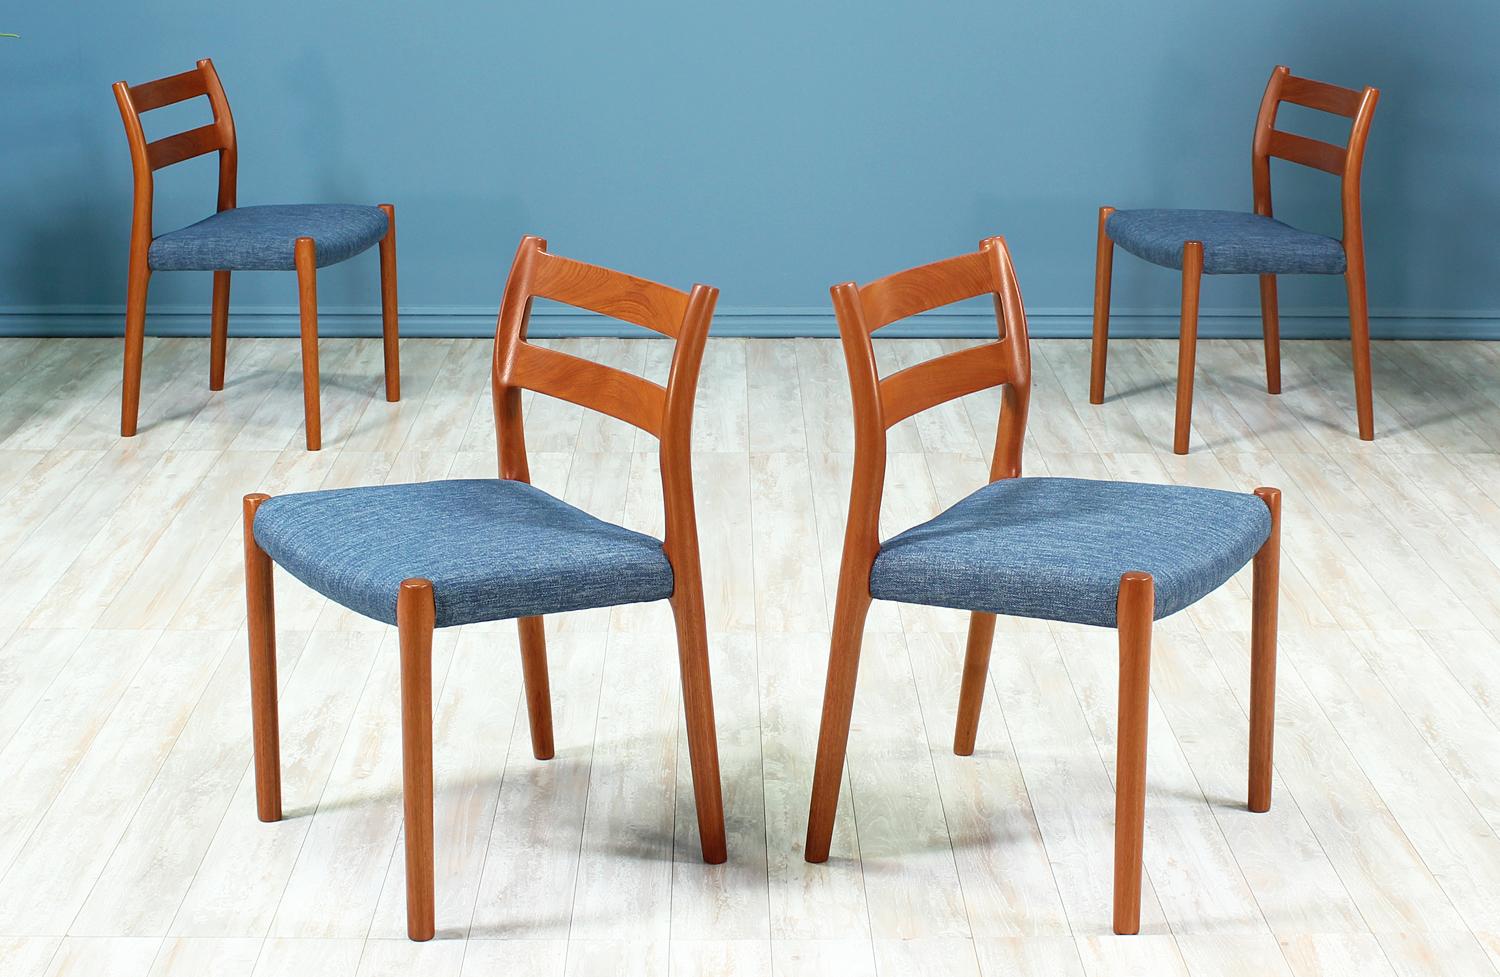 Set of four dining chairs designed by Niels O. Møller for J.L. Møllers in Denmark circa 1970’s. All four chairs are comprised of solid teak wood with new blue tweed upholstery covering the seats. Though mostly machine-made, this chair has a